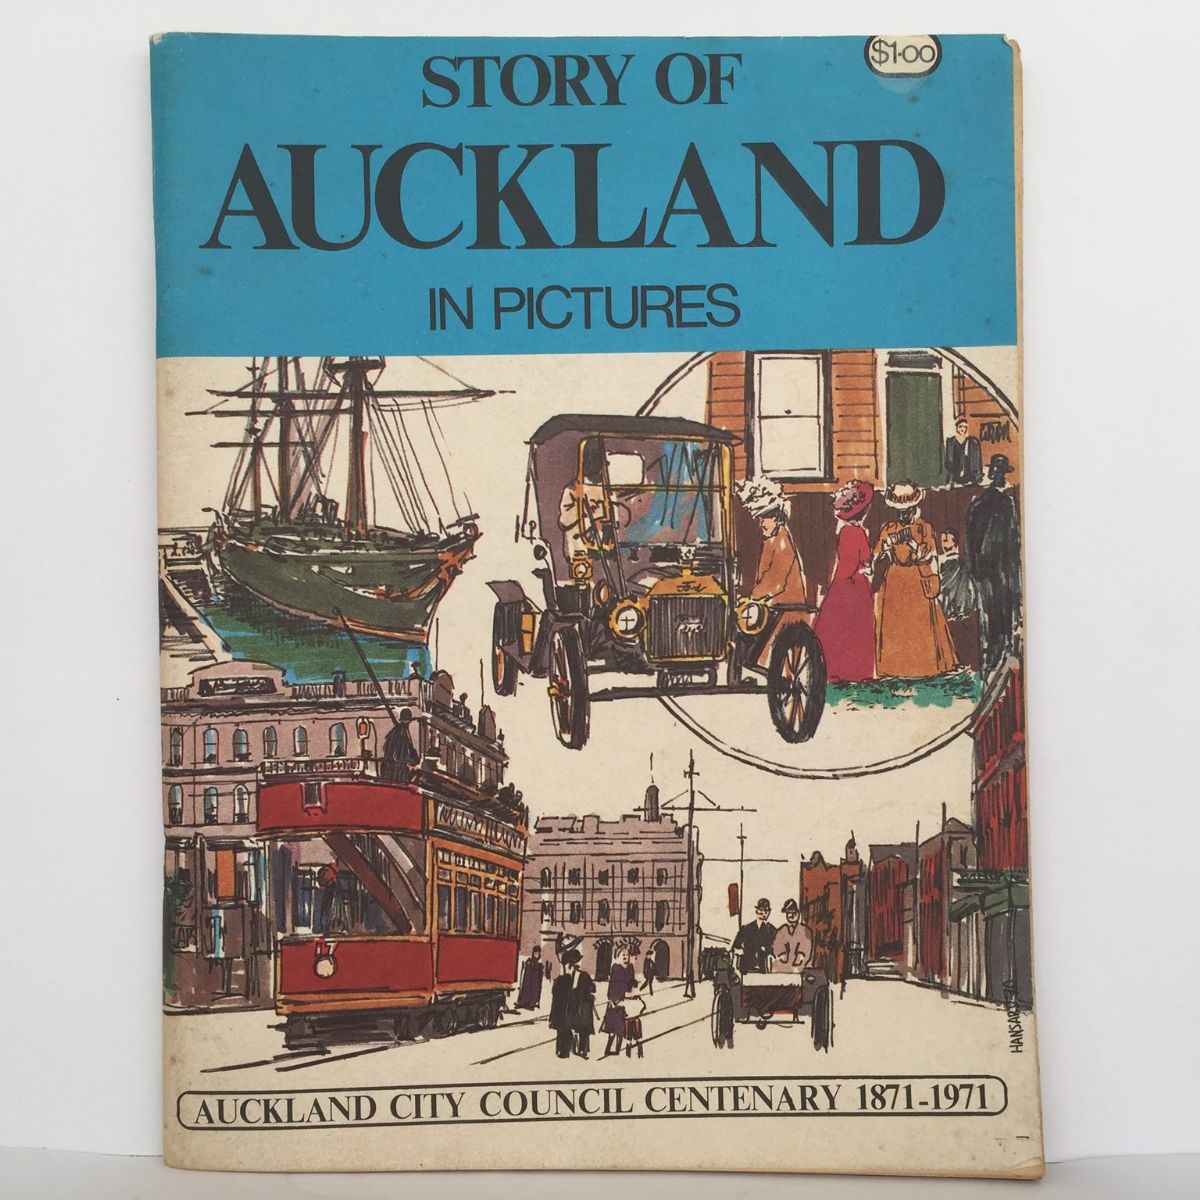 THE STORY OF AUCKLAND in Pictures - Auckland City Council Centenary 1871 - 1971